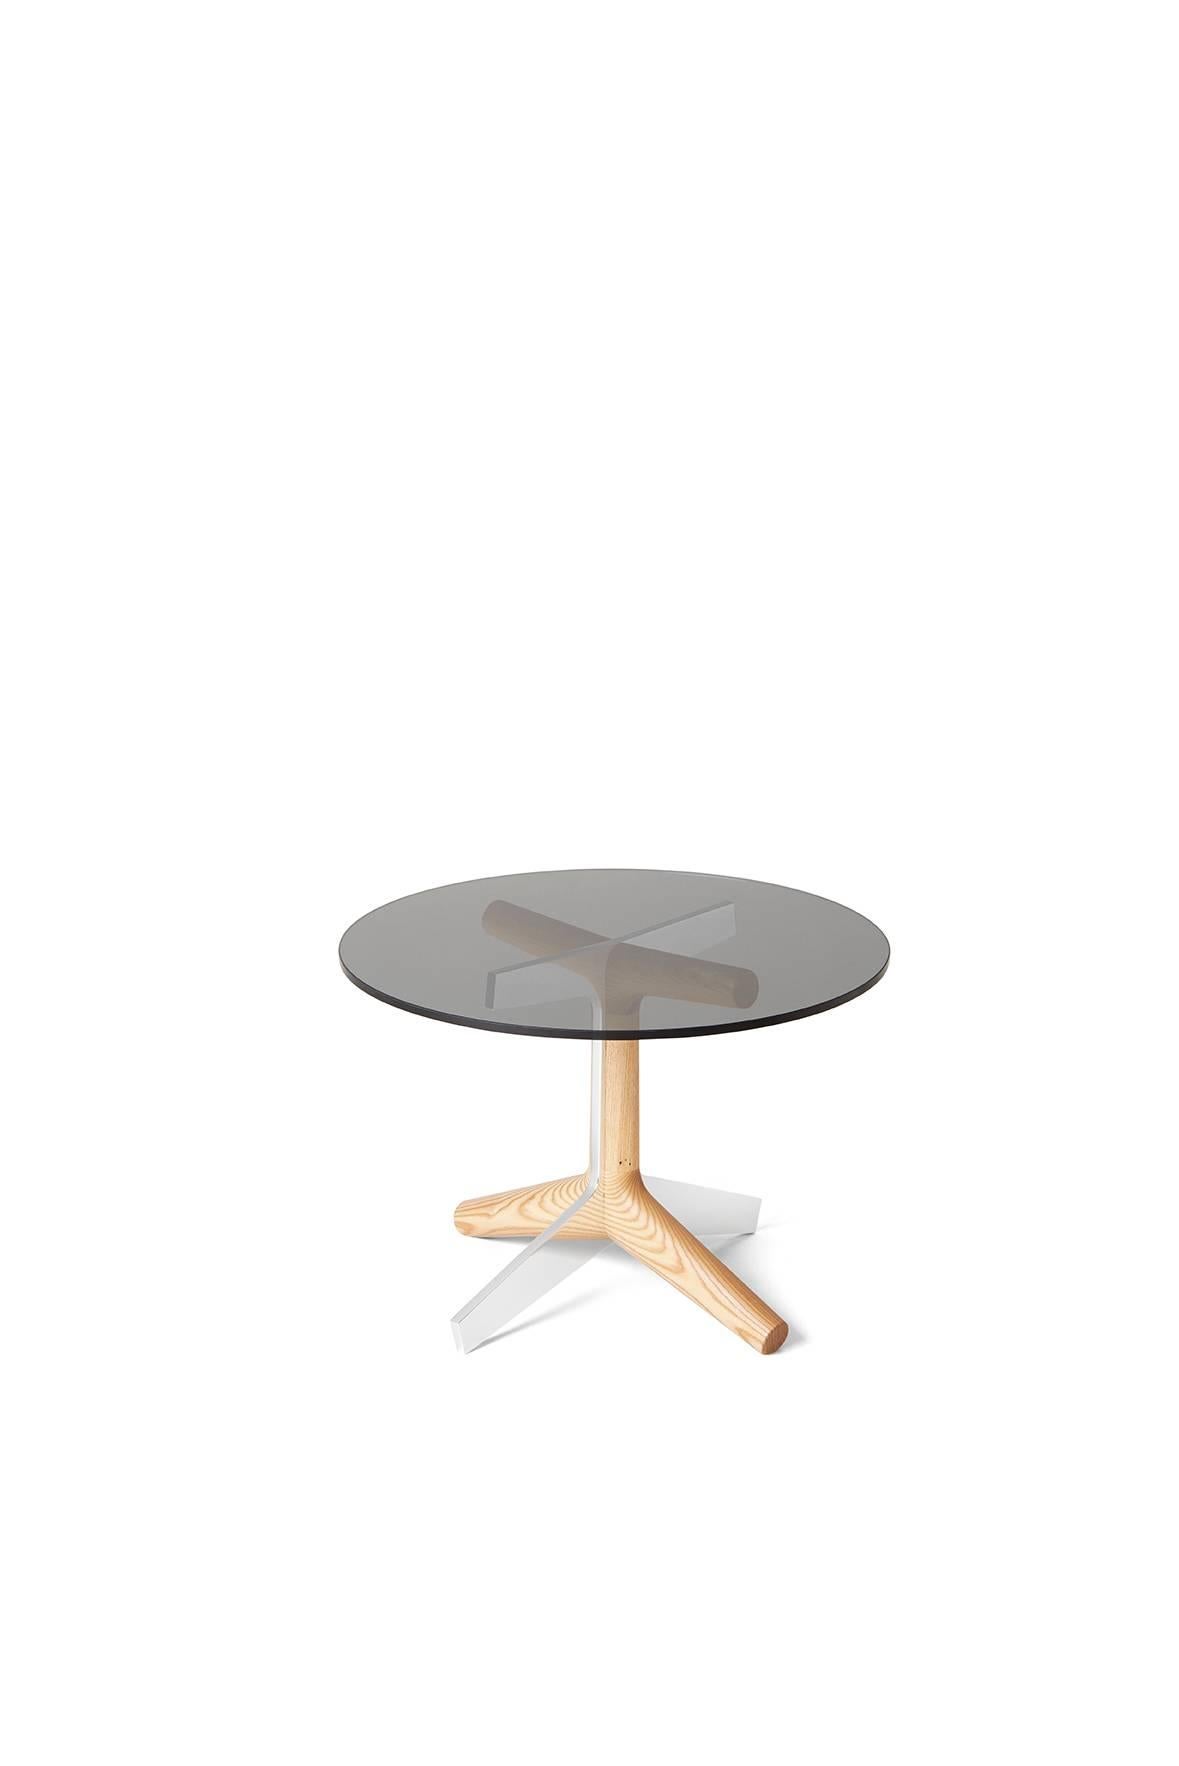 American R4 Side Table, Modern Ash Hardwood, Glass and Polished Aluminum End Table For Sale